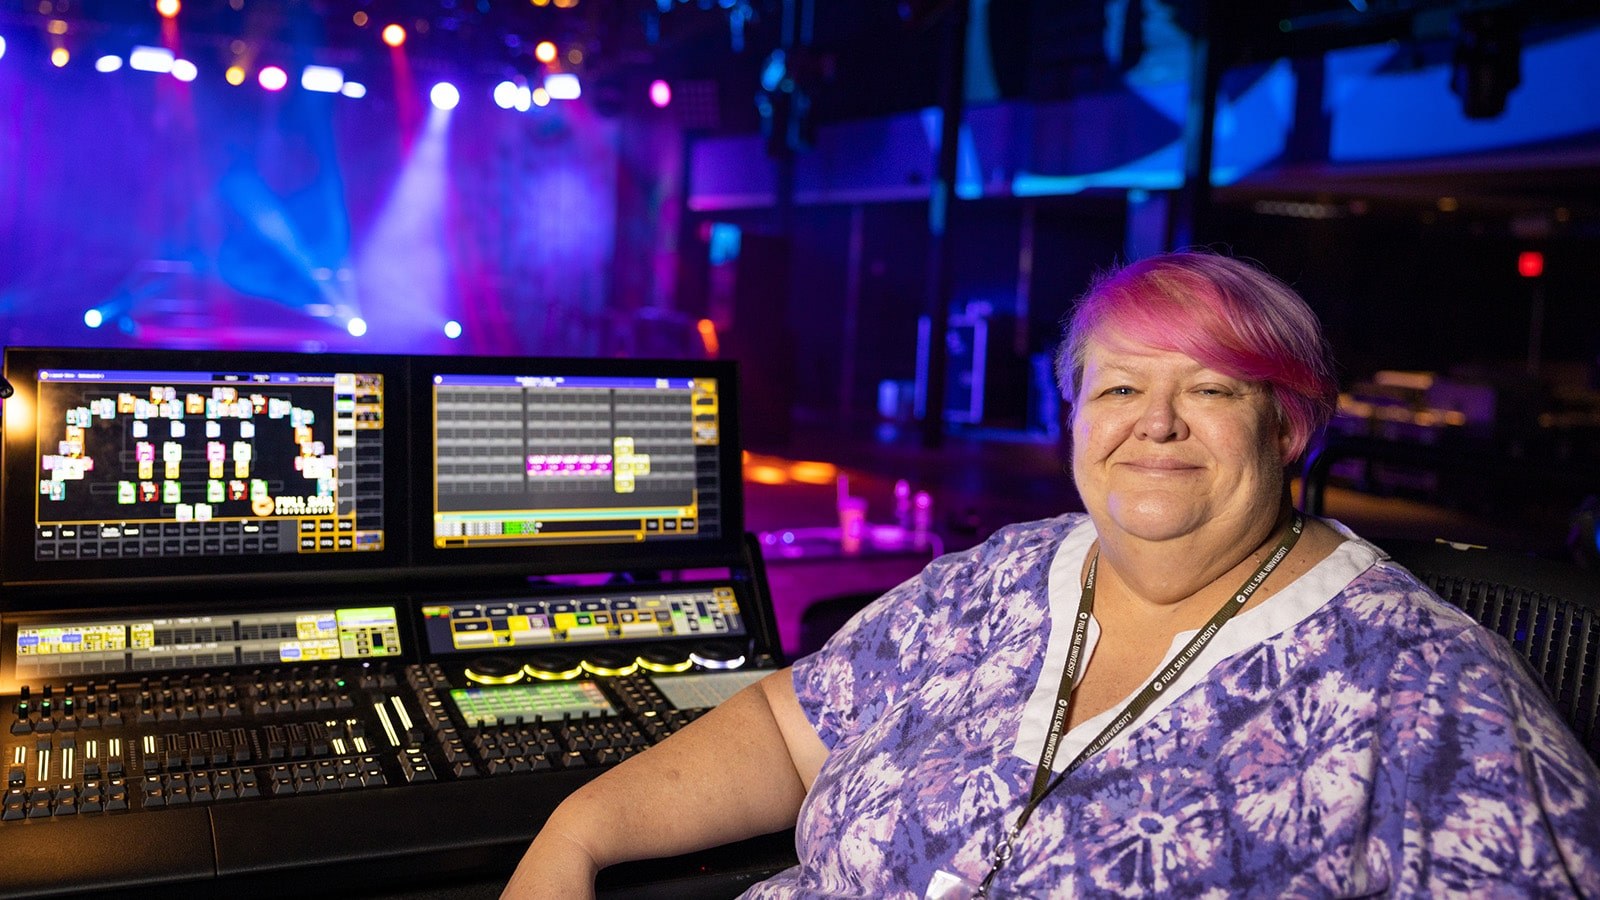 Susan Kelleher sits at a lighting console. The stage behind her is lit up with purple, blue, and white lights.